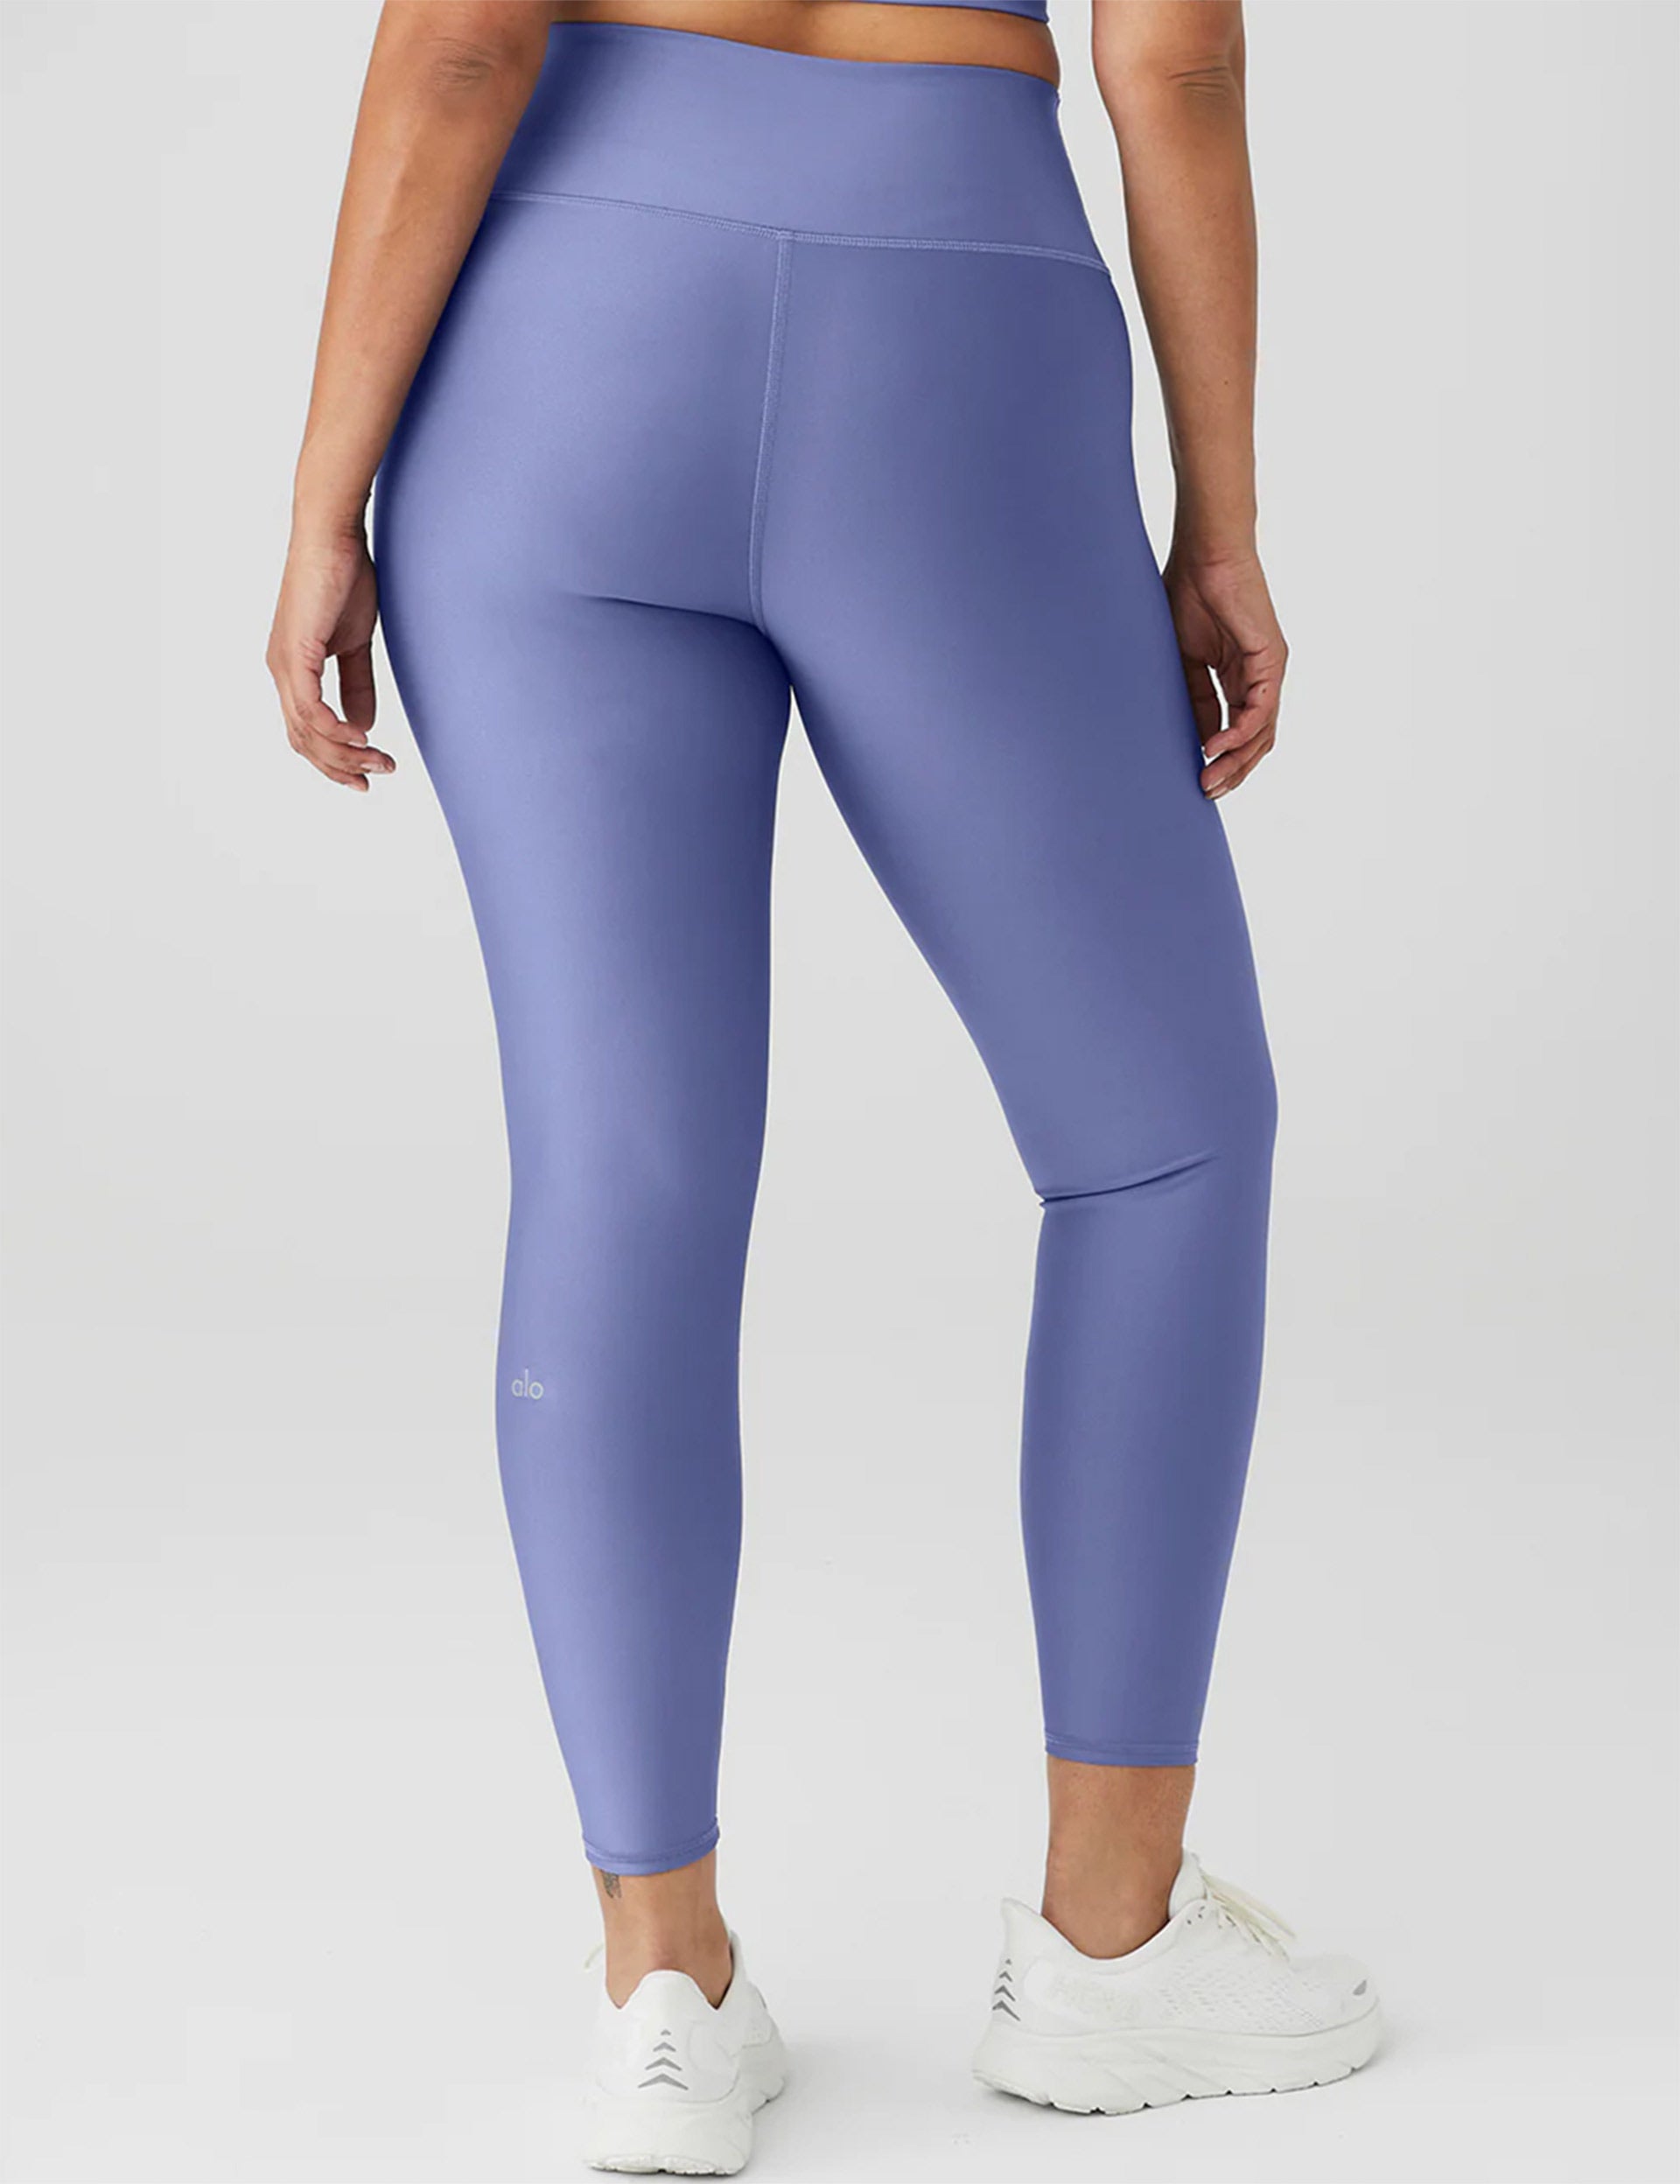 Alo Yoga Alo High-Waist Airlift Leggings Tile Blue Hi-Rise Waisted Skinny  Tights Pants M Size M - $58 - From Shop